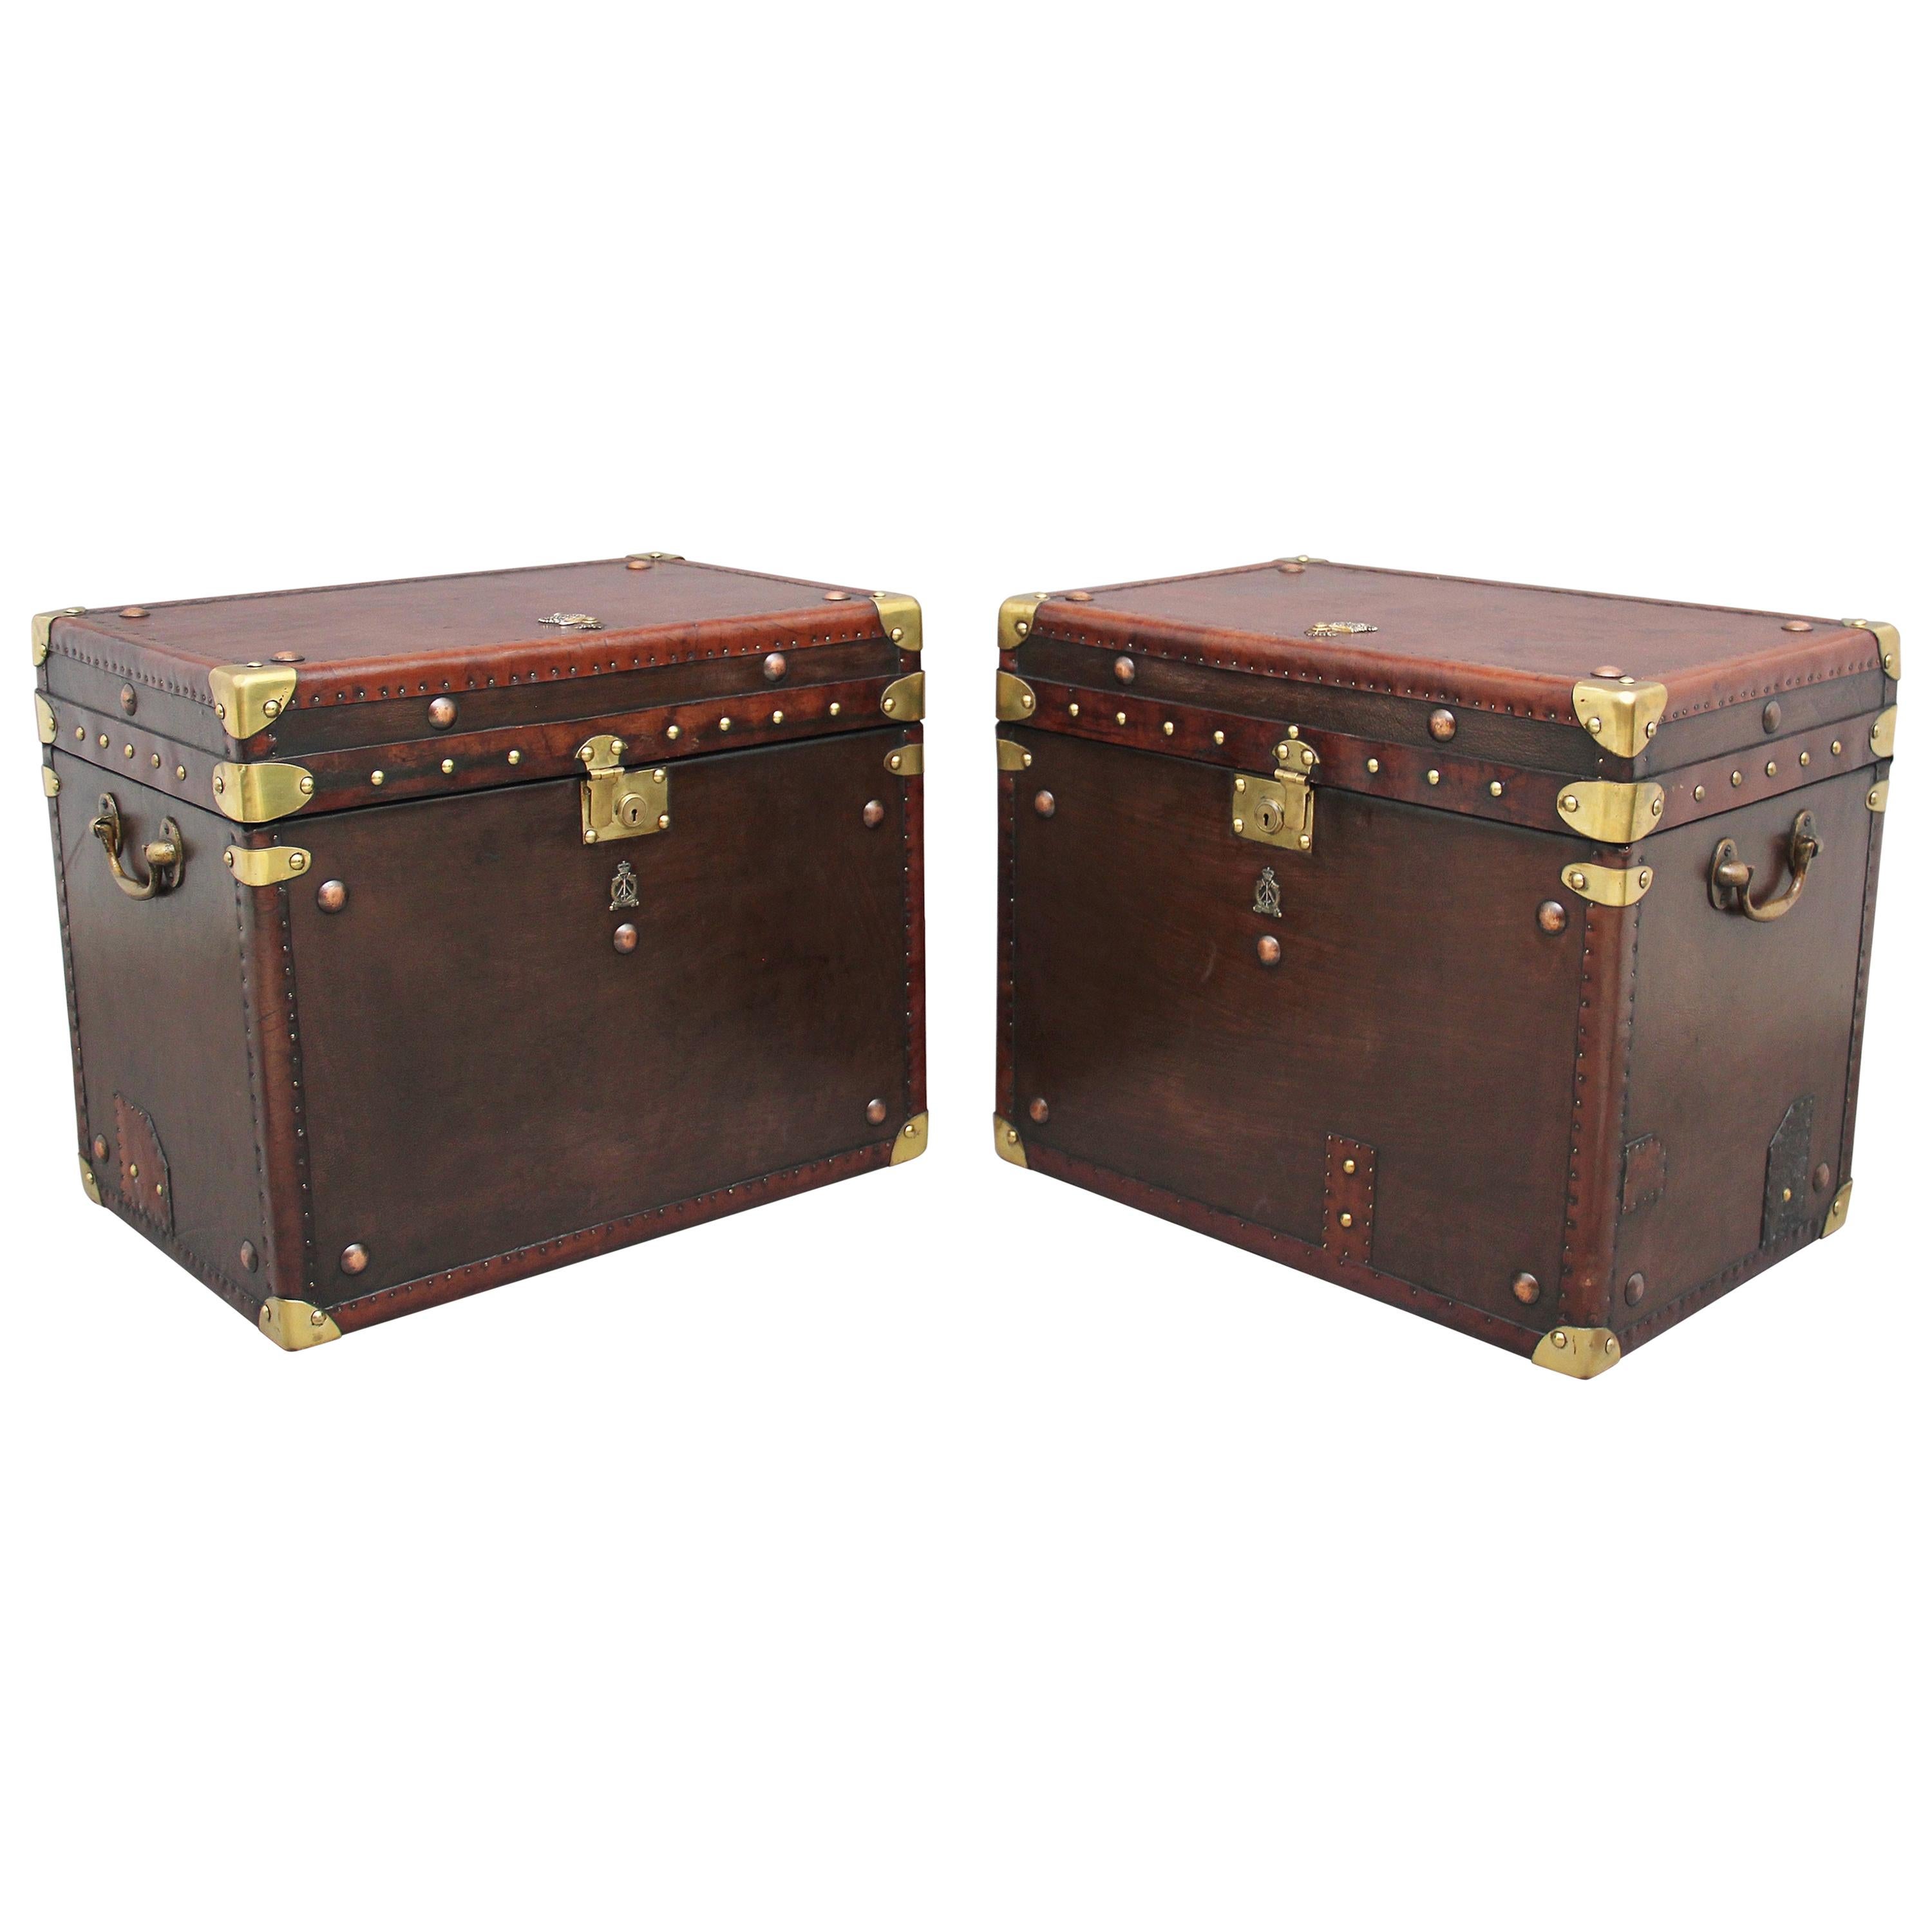 Pair of Early 20th Century Leather Bound Ex Army Trunks